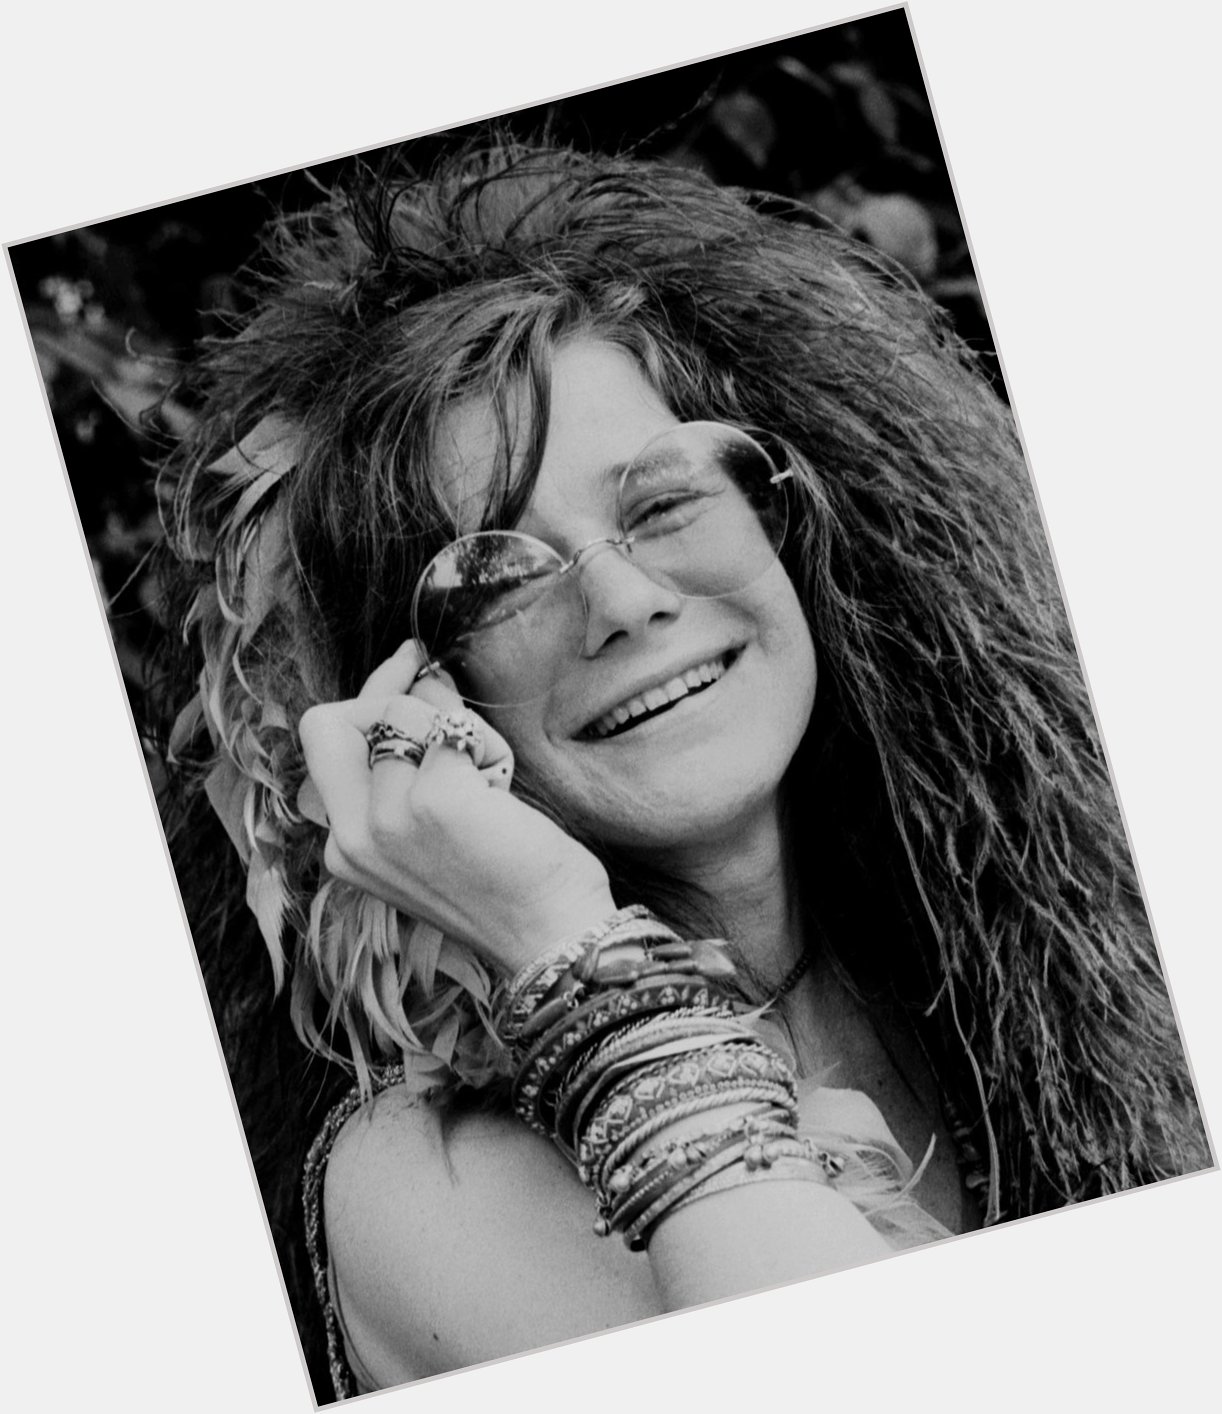 Happy Birthday to Janis Joplin, who would have turned 72 today! 